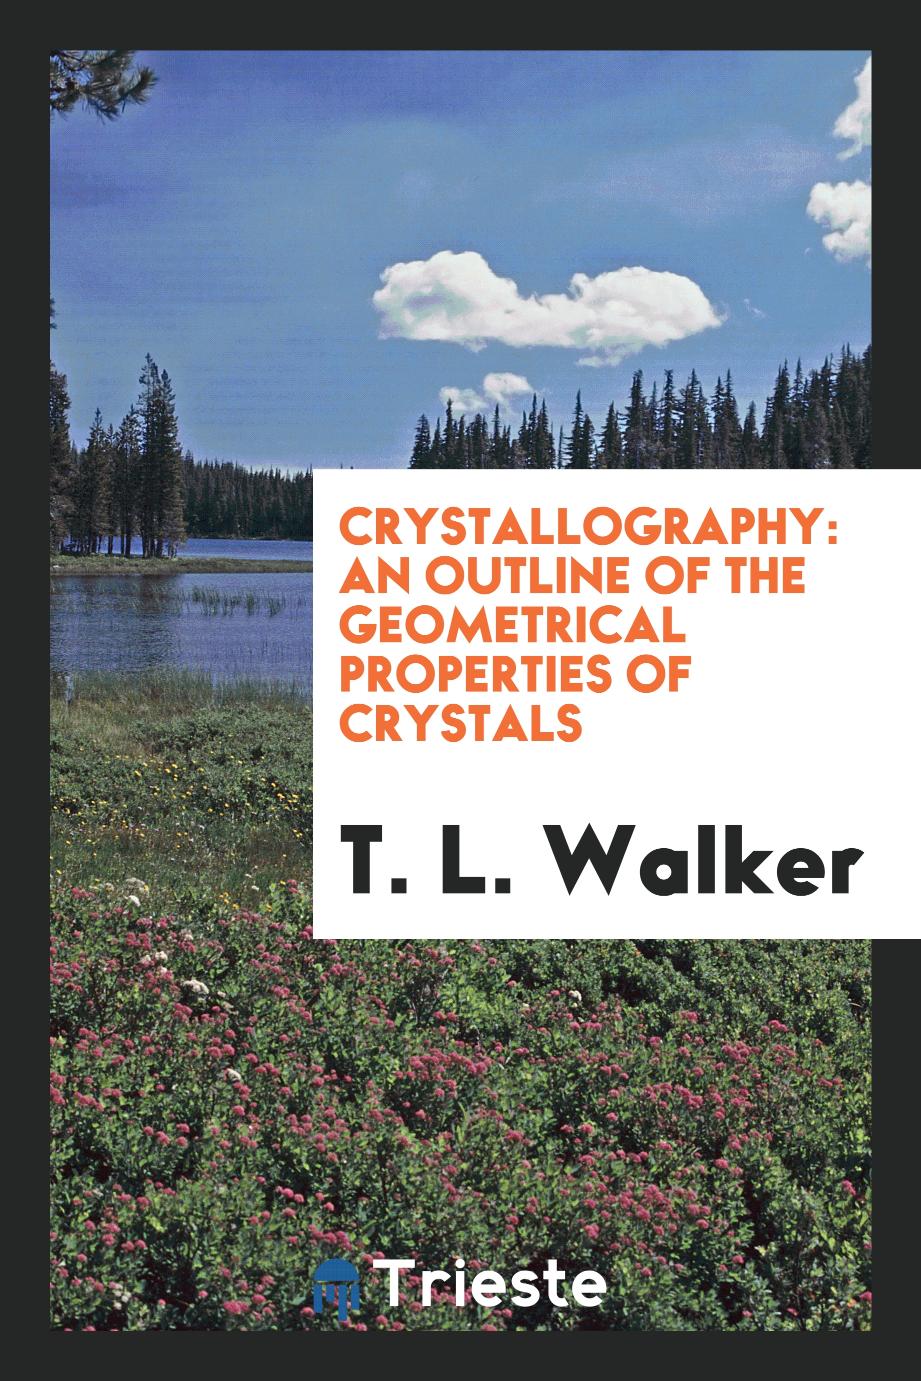 Crystallography: An Outline of the Geometrical Properties of Crystals